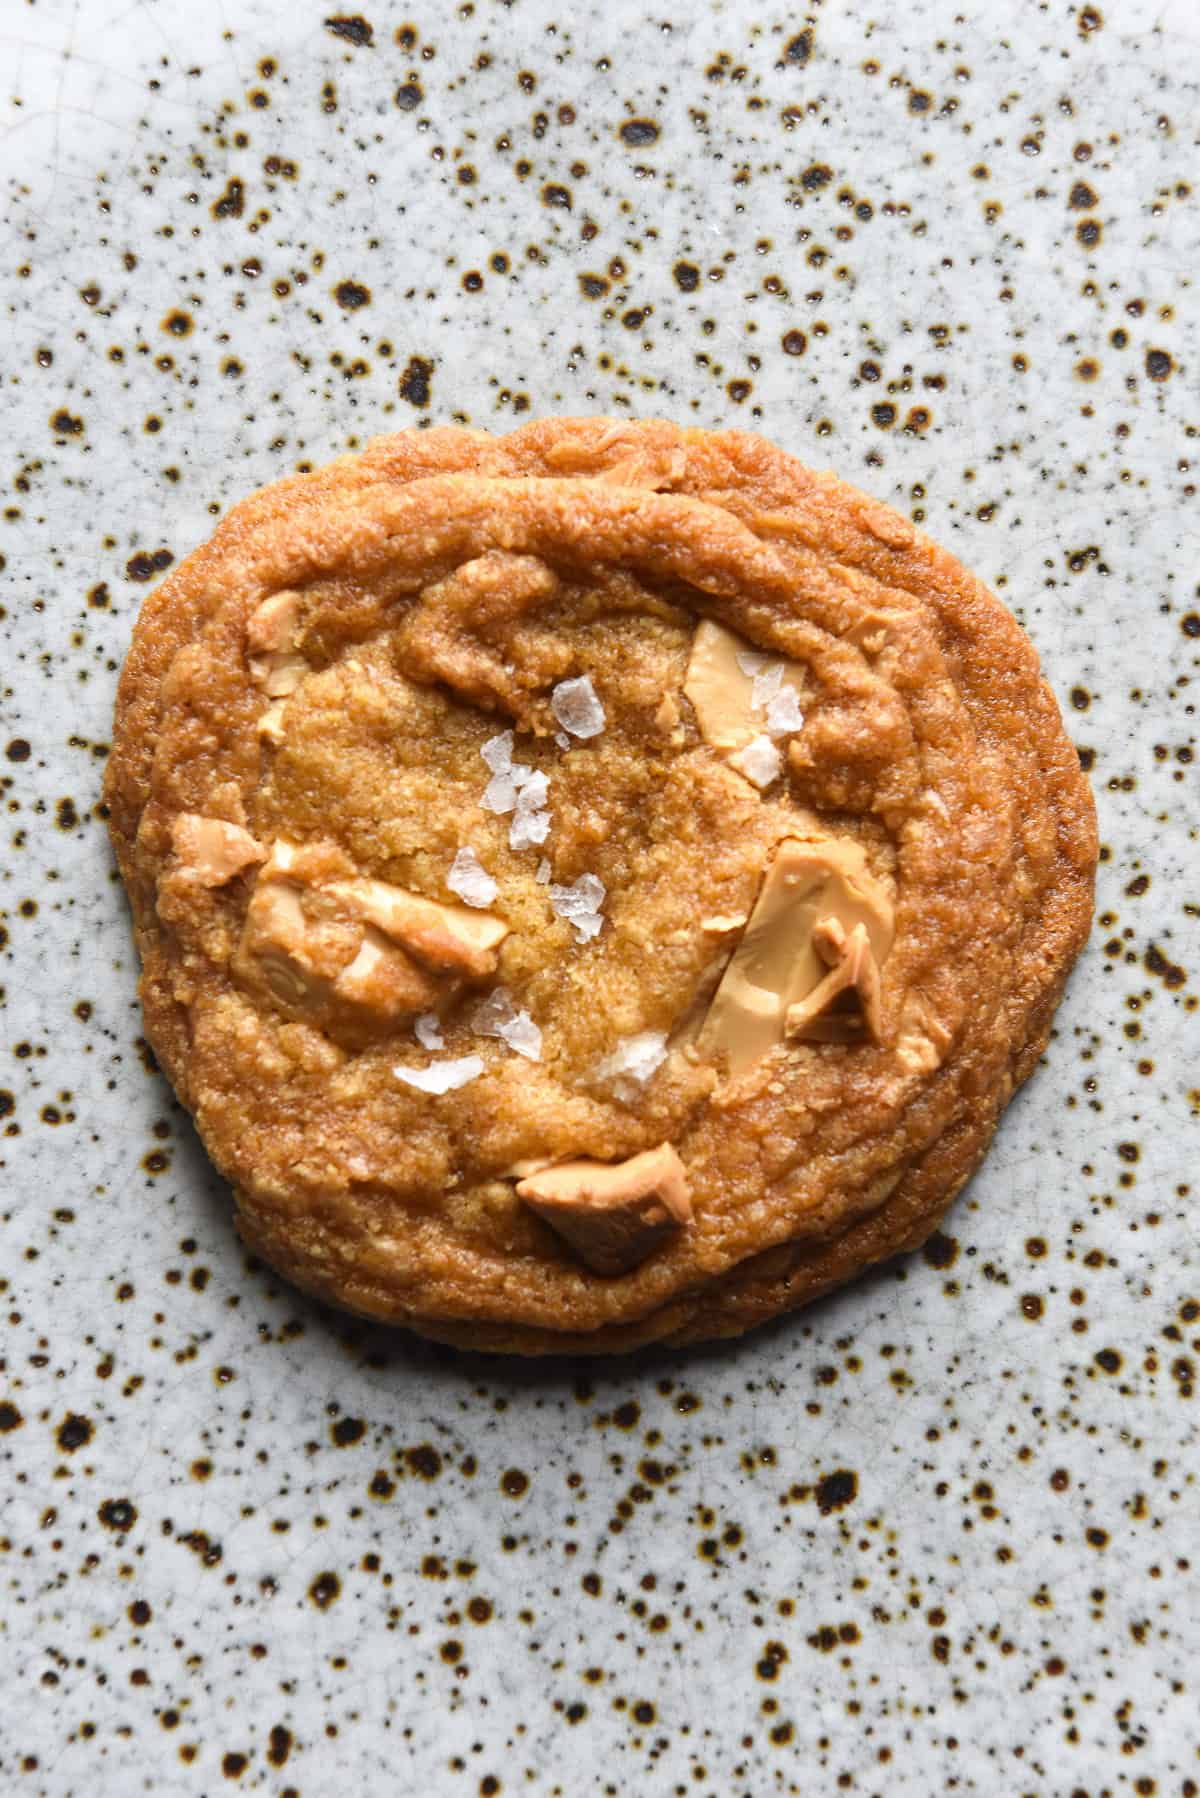 An aerial view of a gluten free choc chip cookie with white chocolate chips and sea salt flakes. The cookie sits atop a white speckled ceramic plate. 